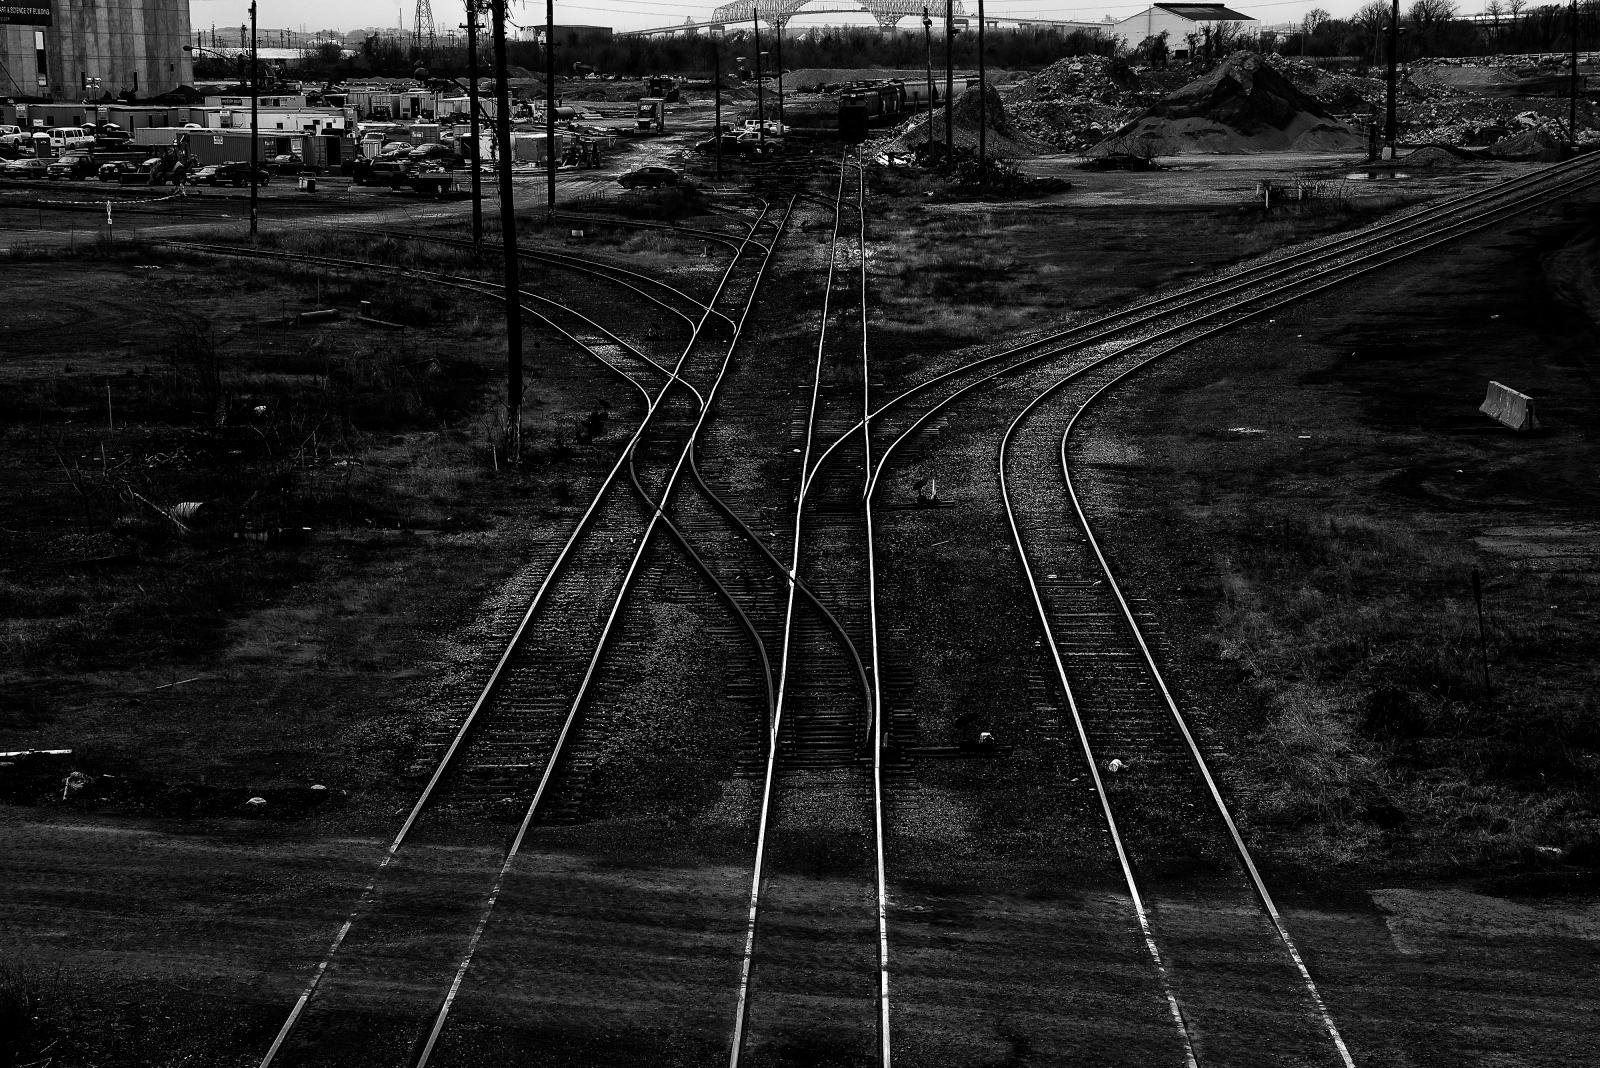  All for Thee This Day: The Fall of International Steel -  Abandoned tracks 